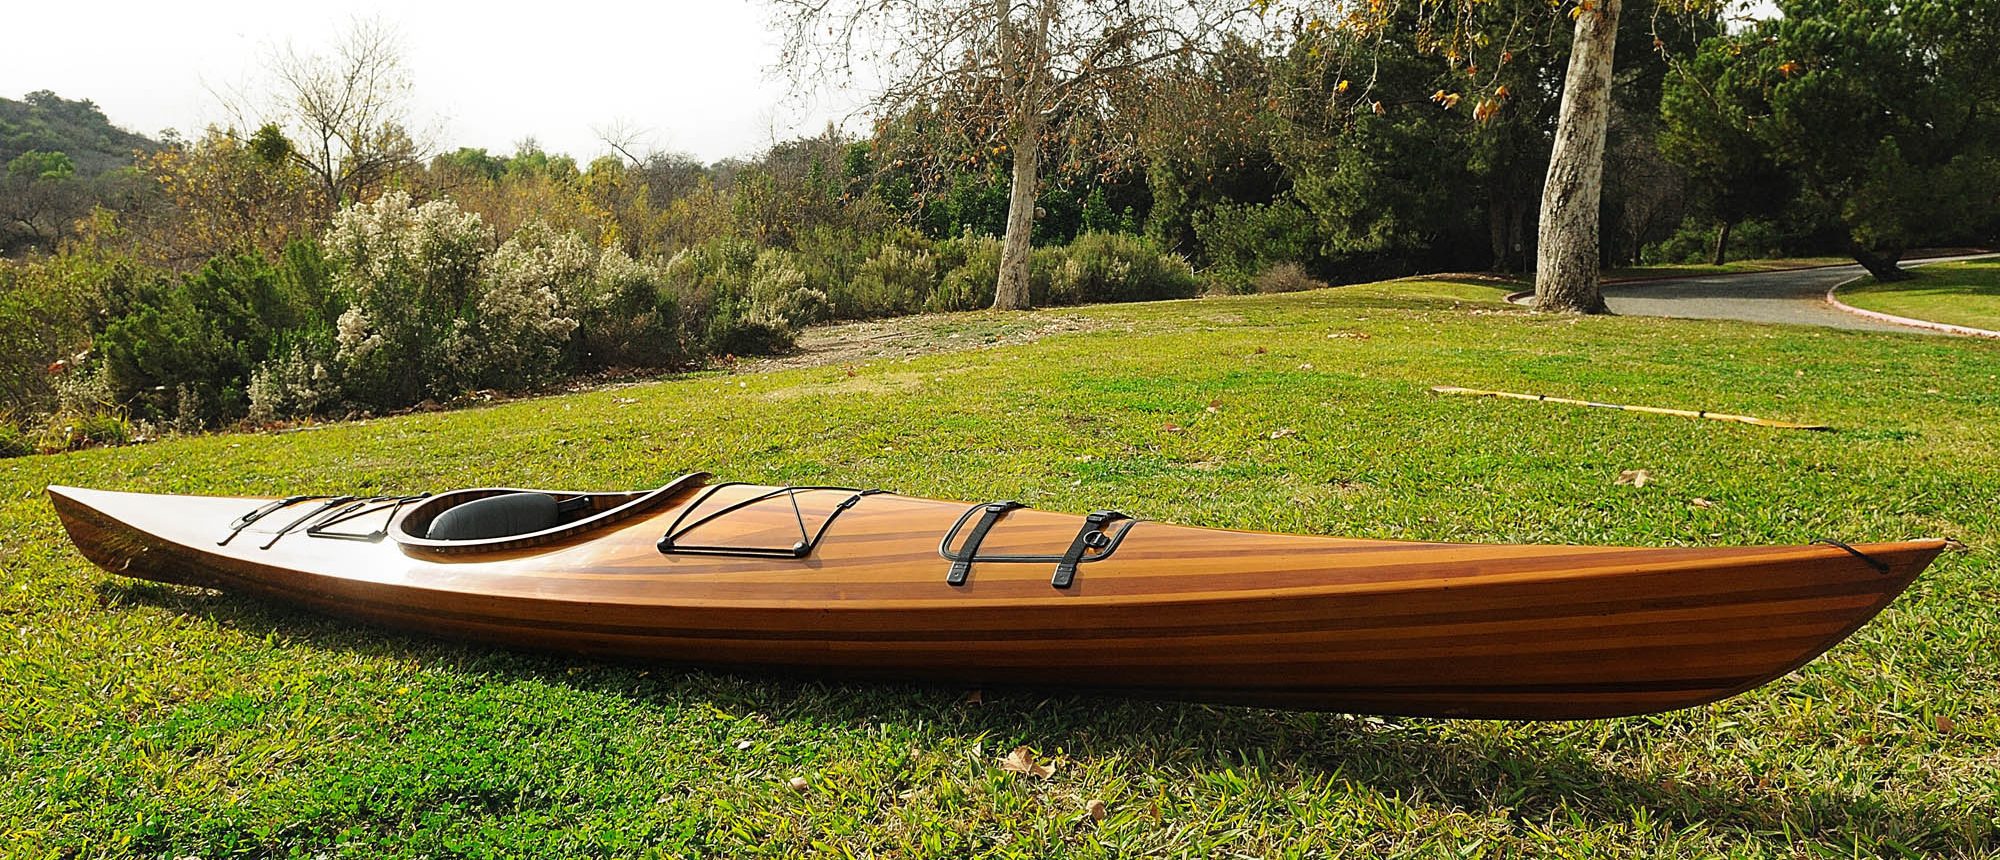 Explore classic wooden kayak 15 foot - Wooden Boat USA